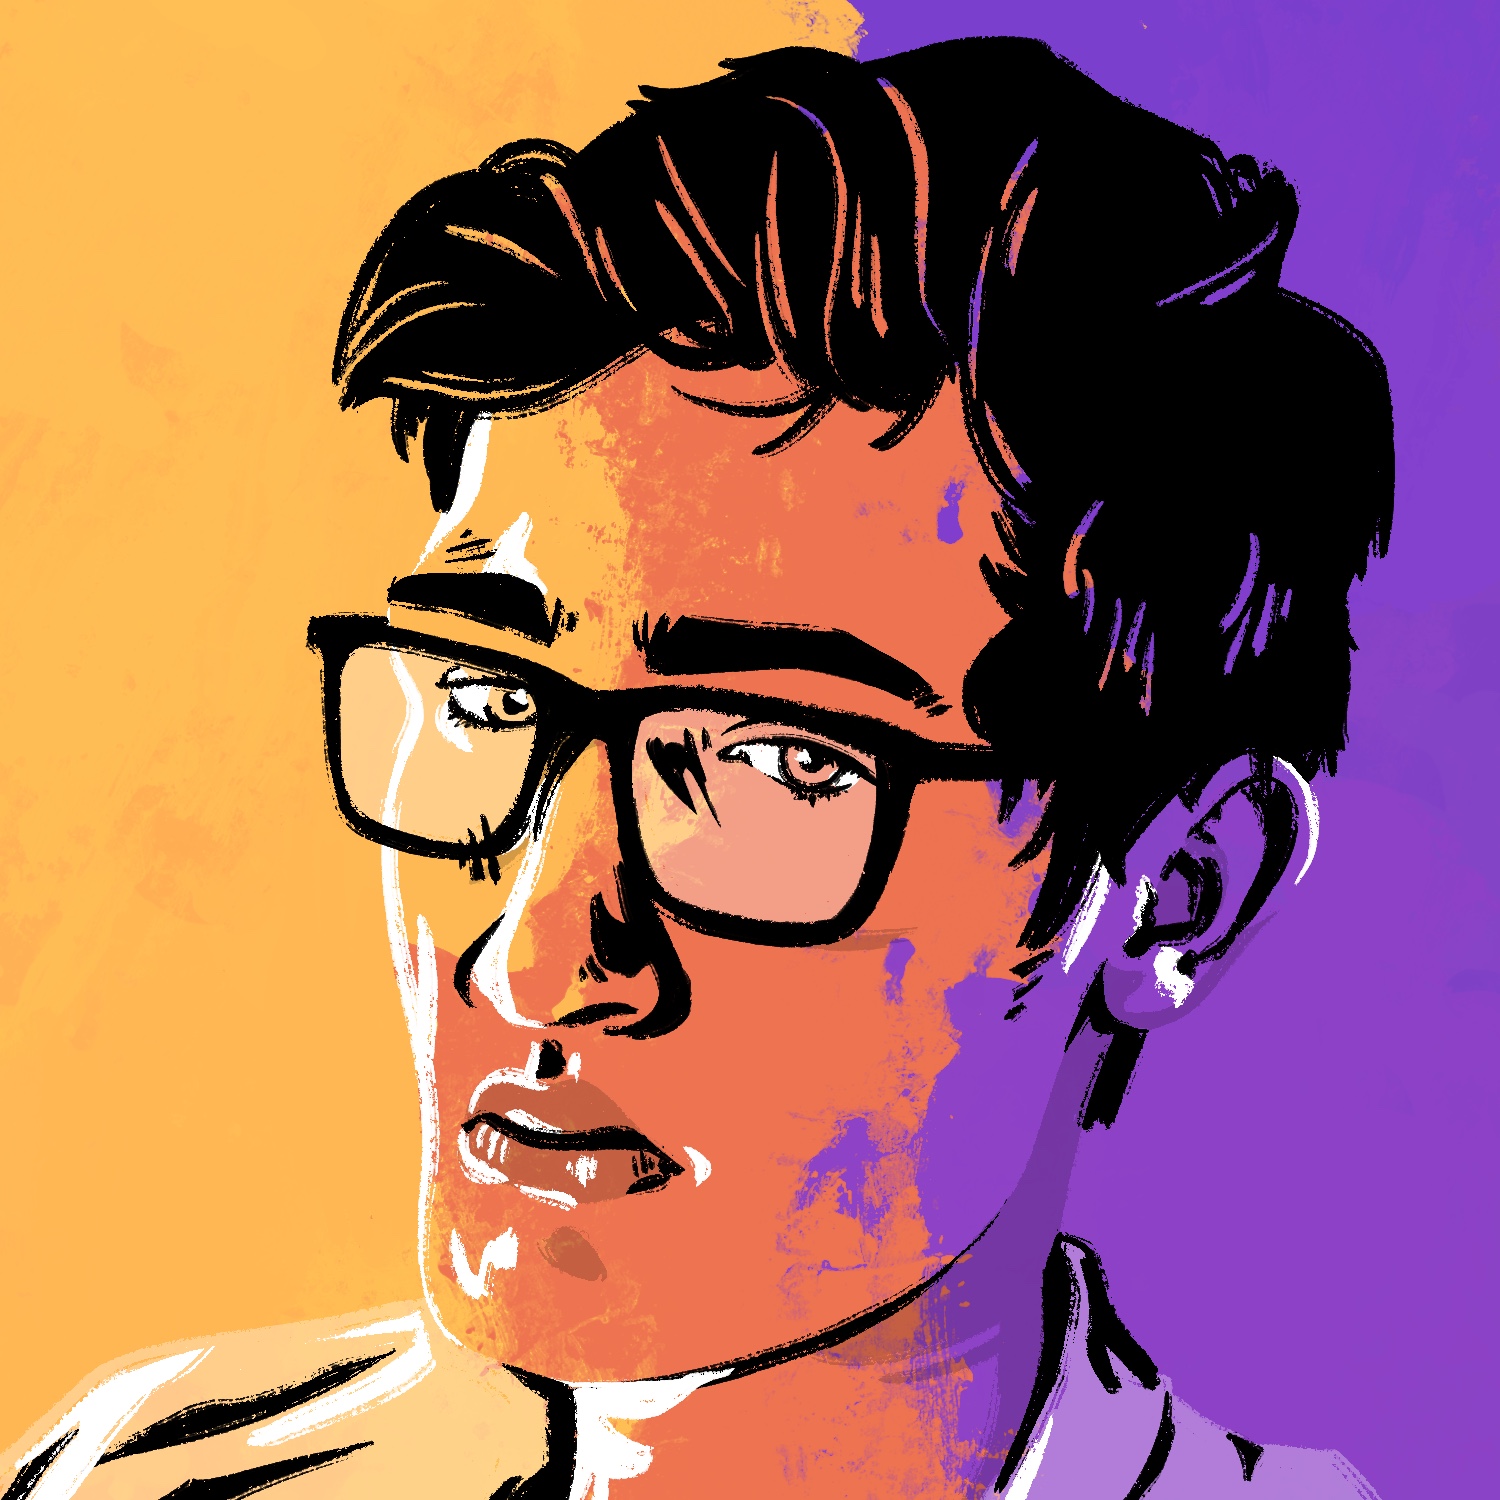 An illustration of a man with his head turned slightly away from the viewer, but with his eyes still looking this way. The man has a long face and dark eyebrows and hair. He has on a pair of glasses and has a neutral expression on his face. The drawing is rendered with the man highlight and shadow over a messy background of gold, red, and purple, which overlap onto him and give him extra bits of shading on the left and right sides.